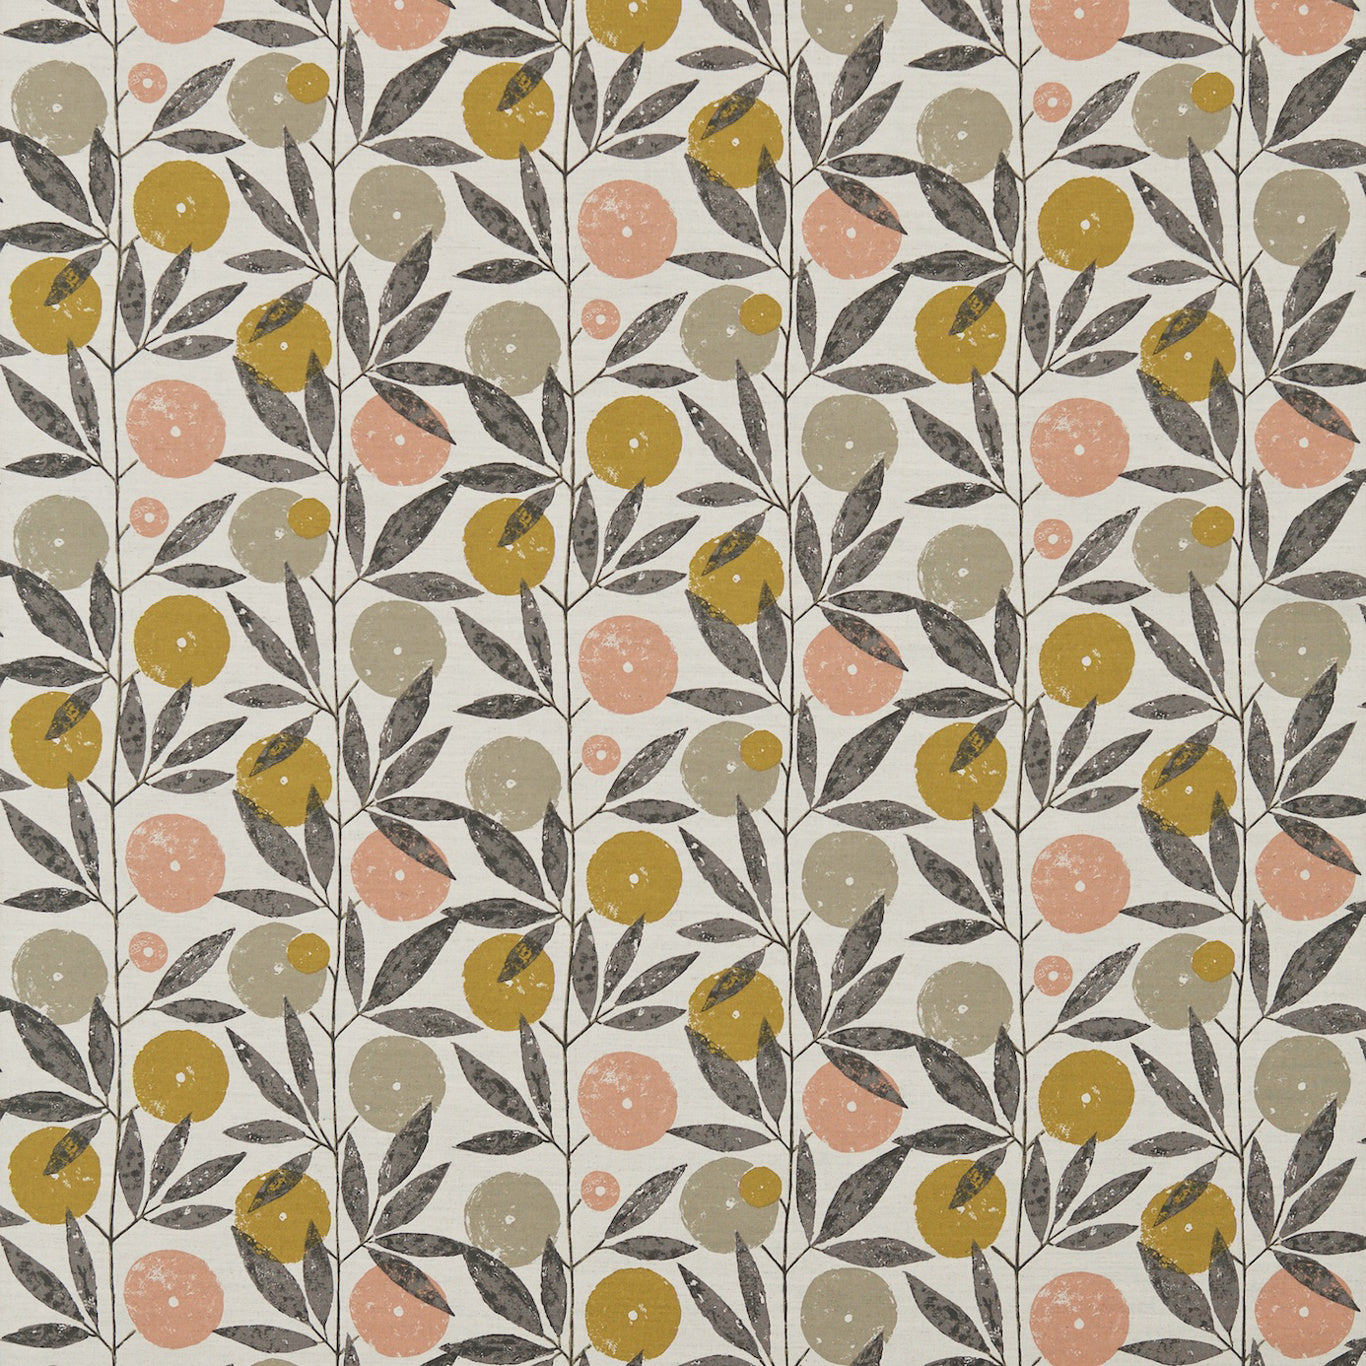 Blomma Fabric by Scion - NFIK120359 - Toffee/Blush/Putty